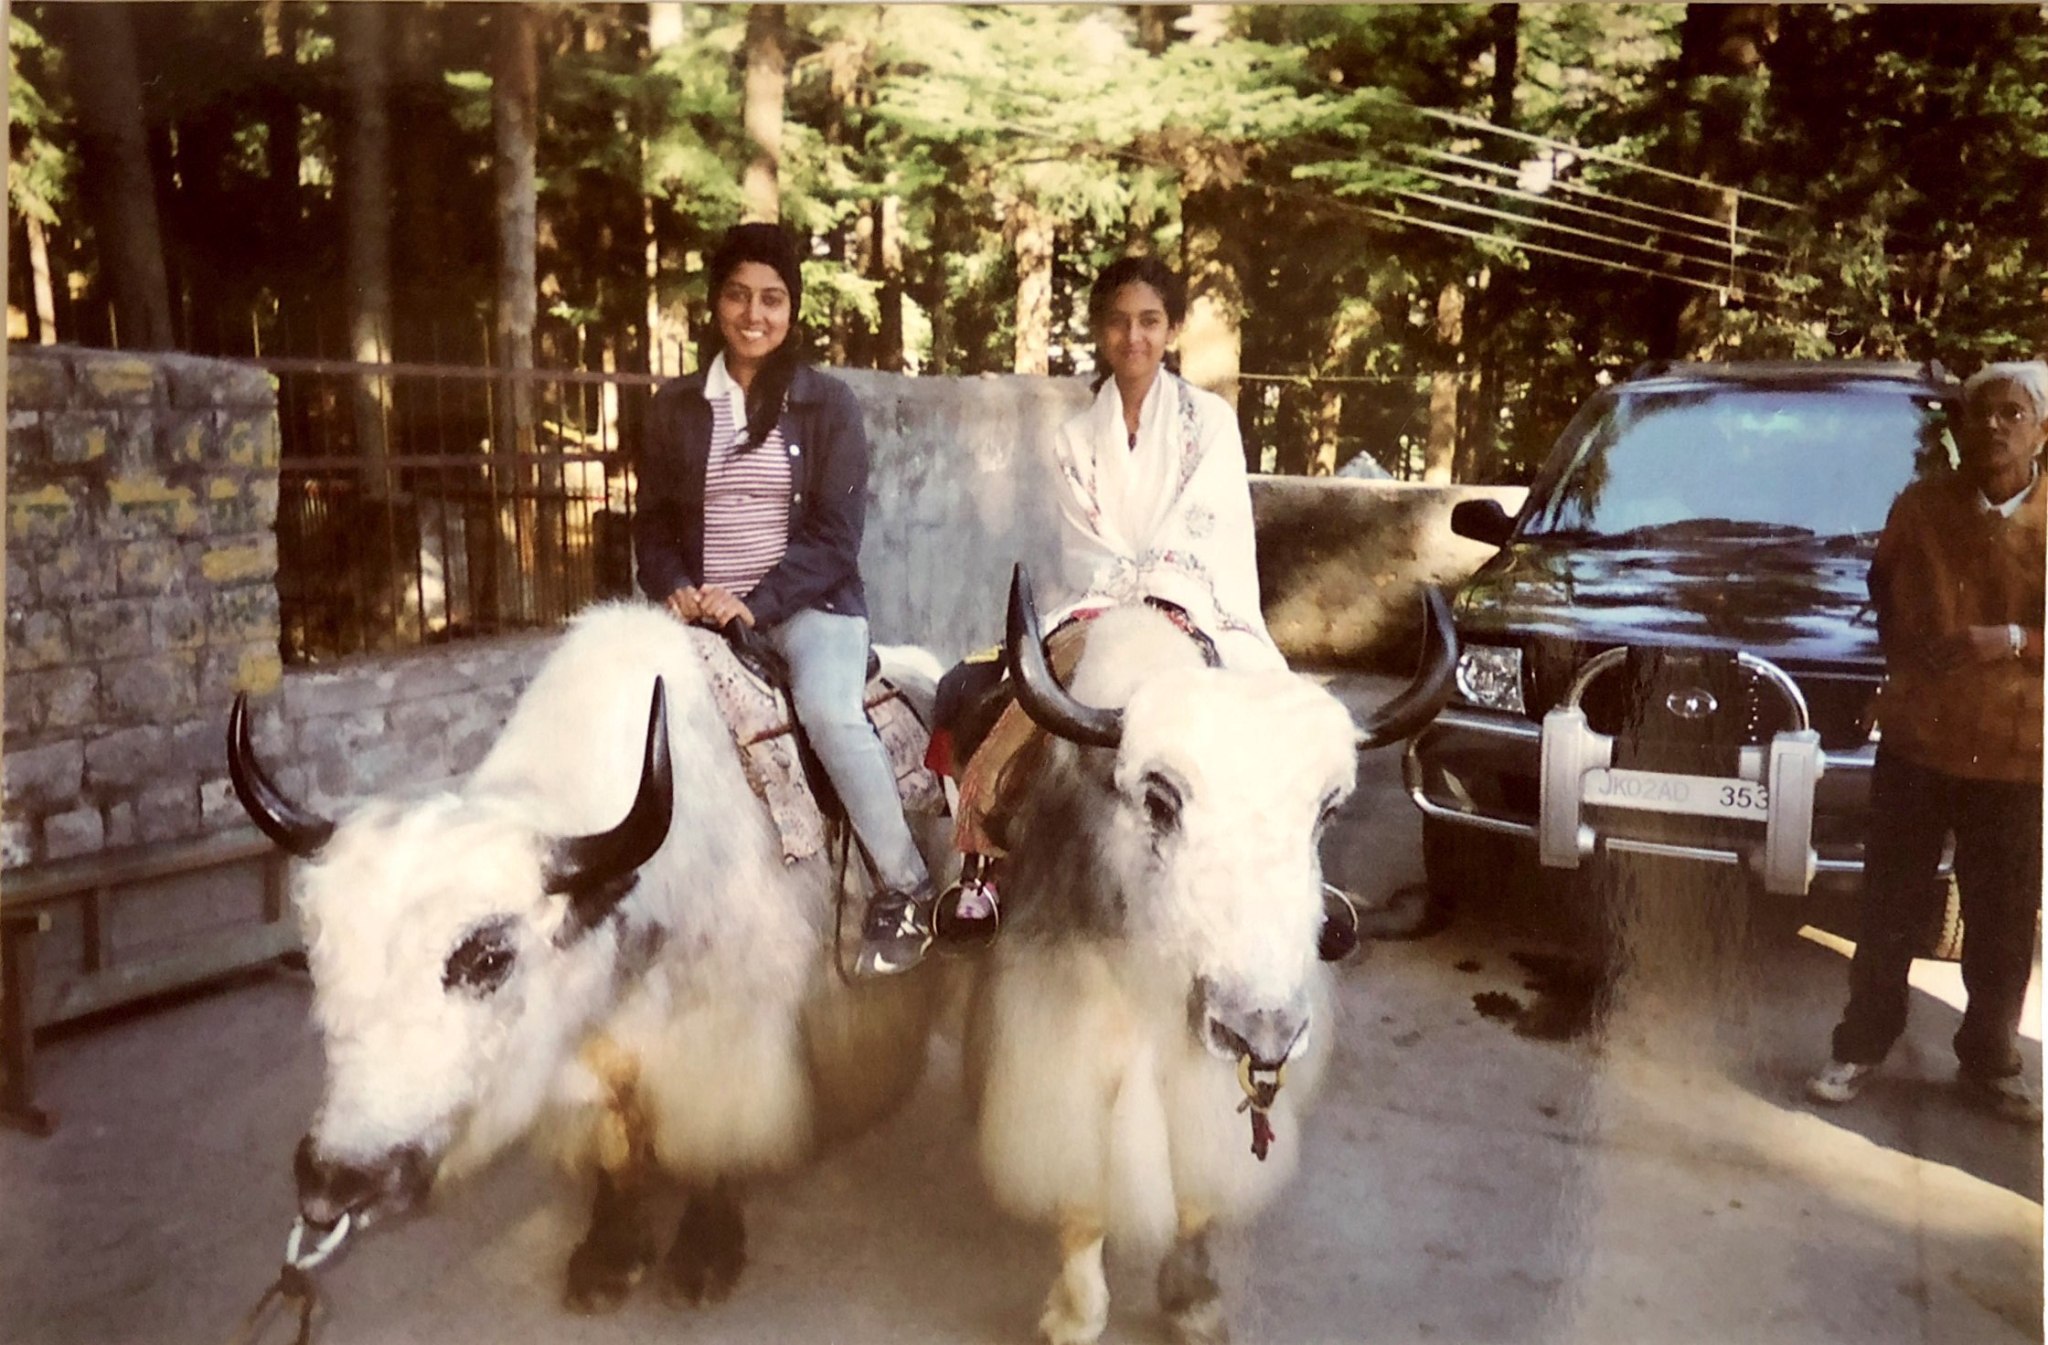 Older photo of two women, Ganeshan and her sister on Himalayan yaks